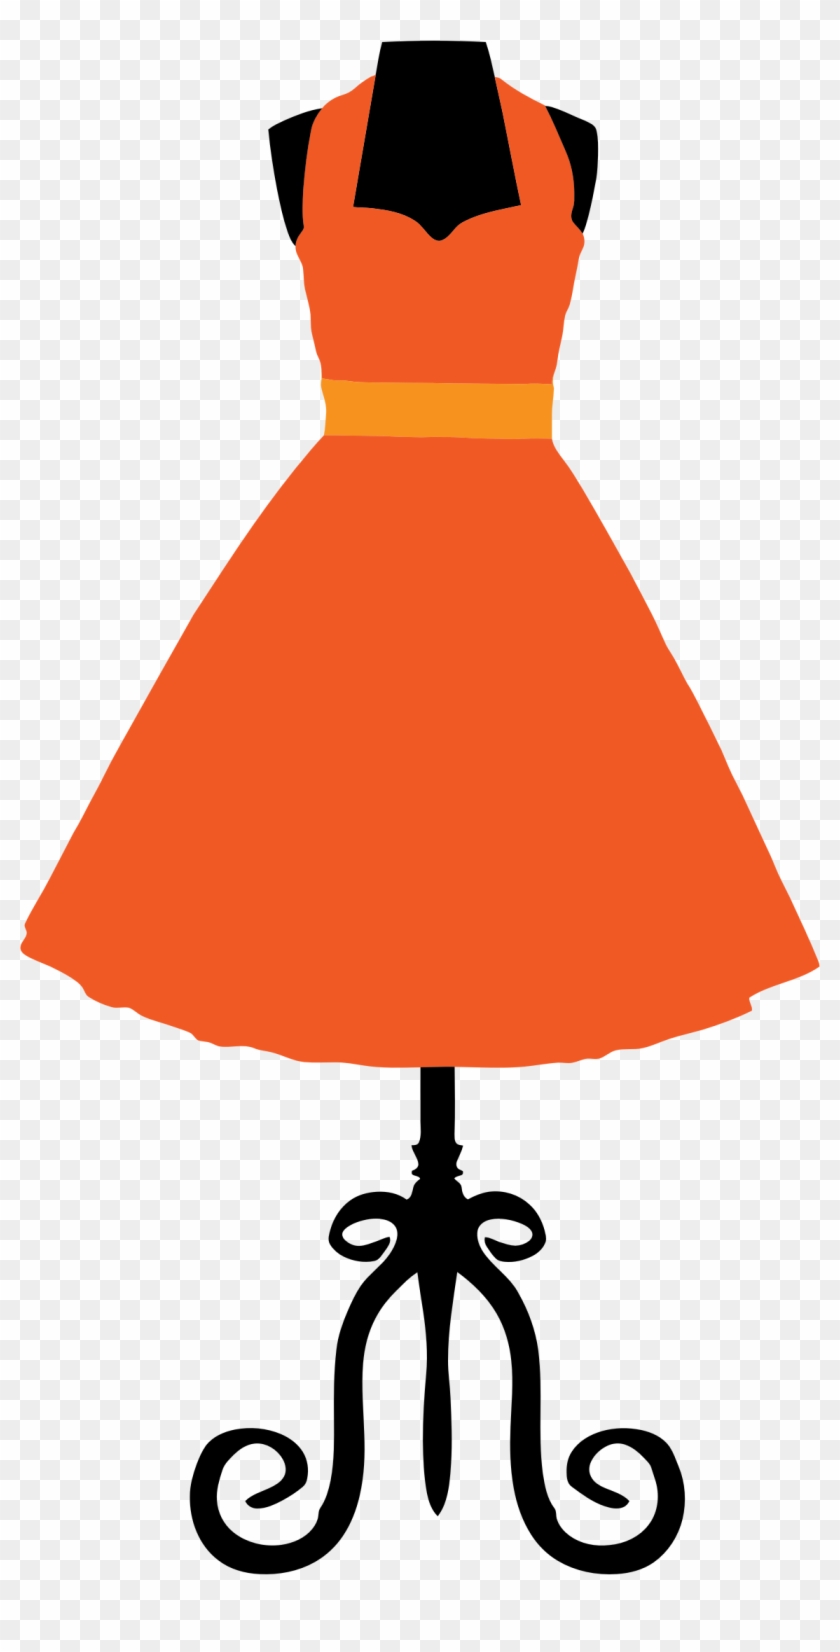 This Free Icons Png Design Of 1950's Vintage Dress - Dress Vintage Png #221410